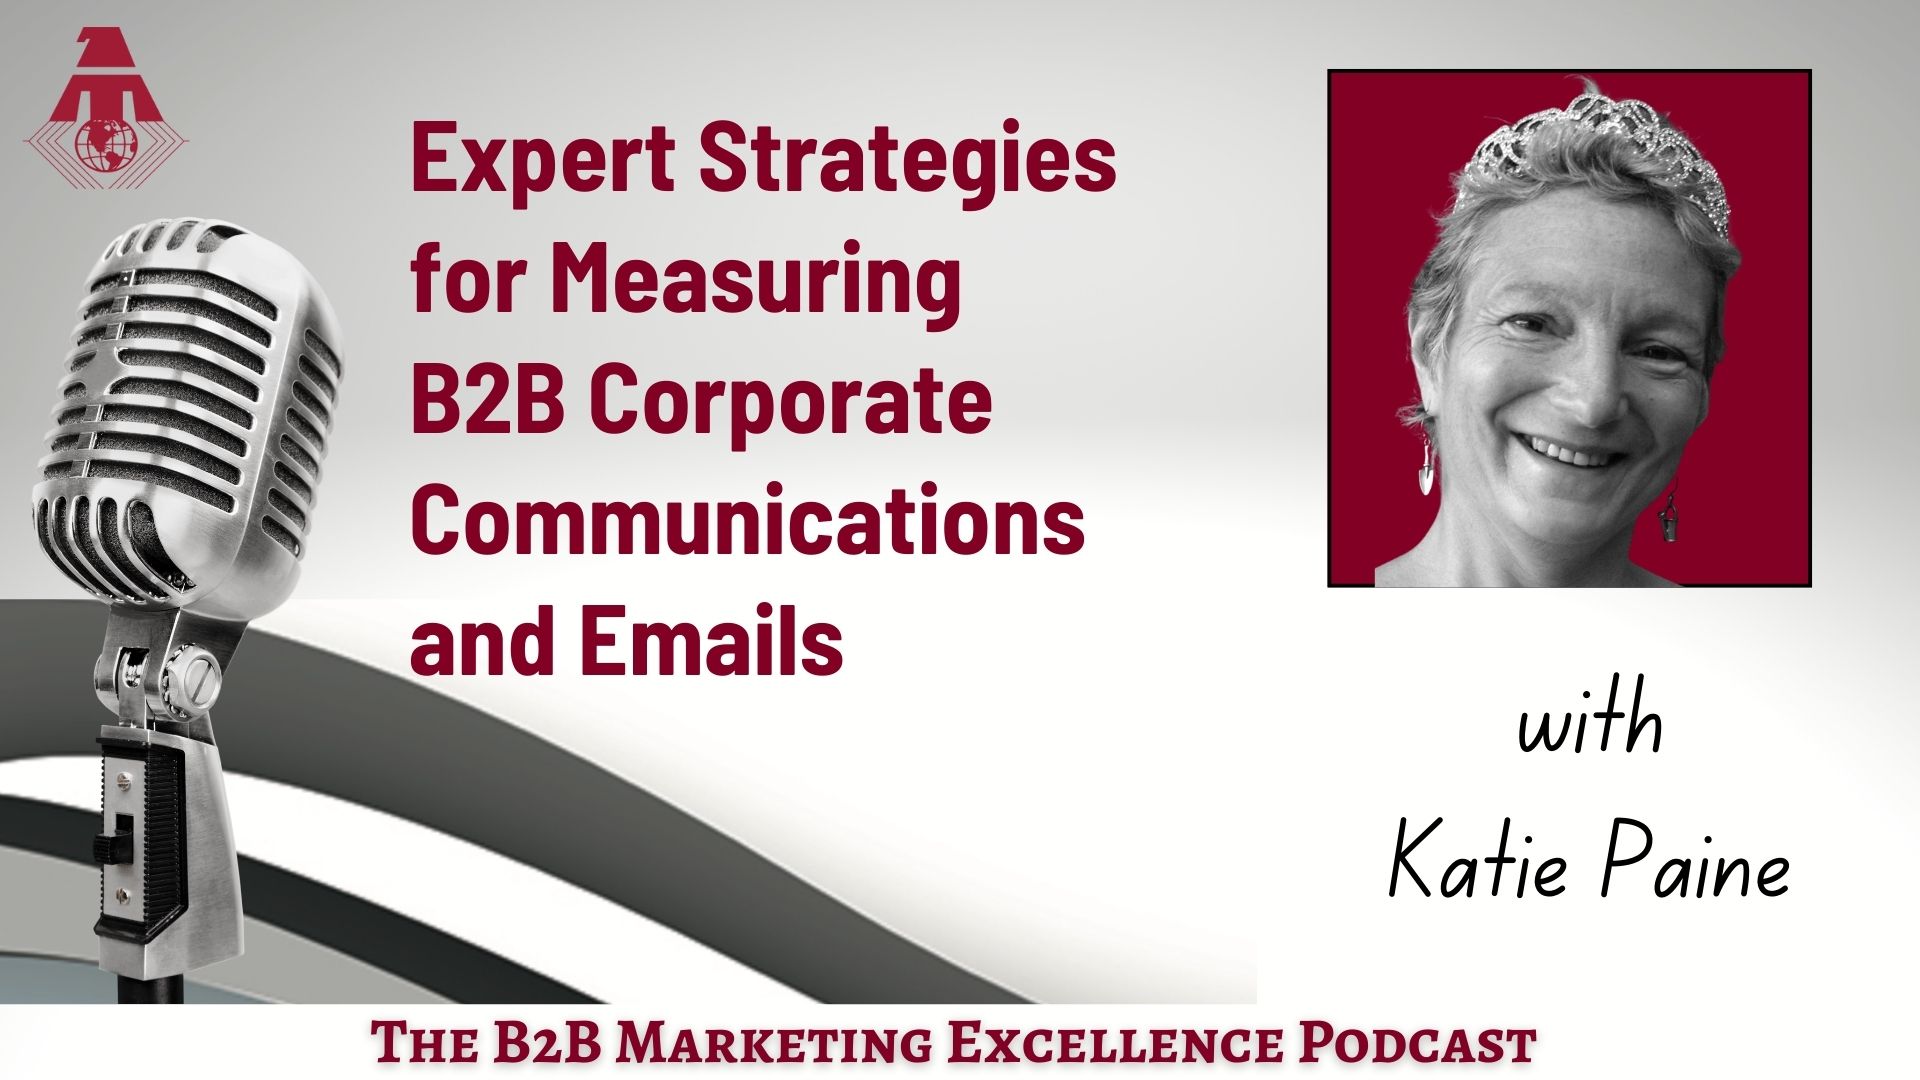 Expert Strategies for Measuring B2B Corporate Communications and Emails